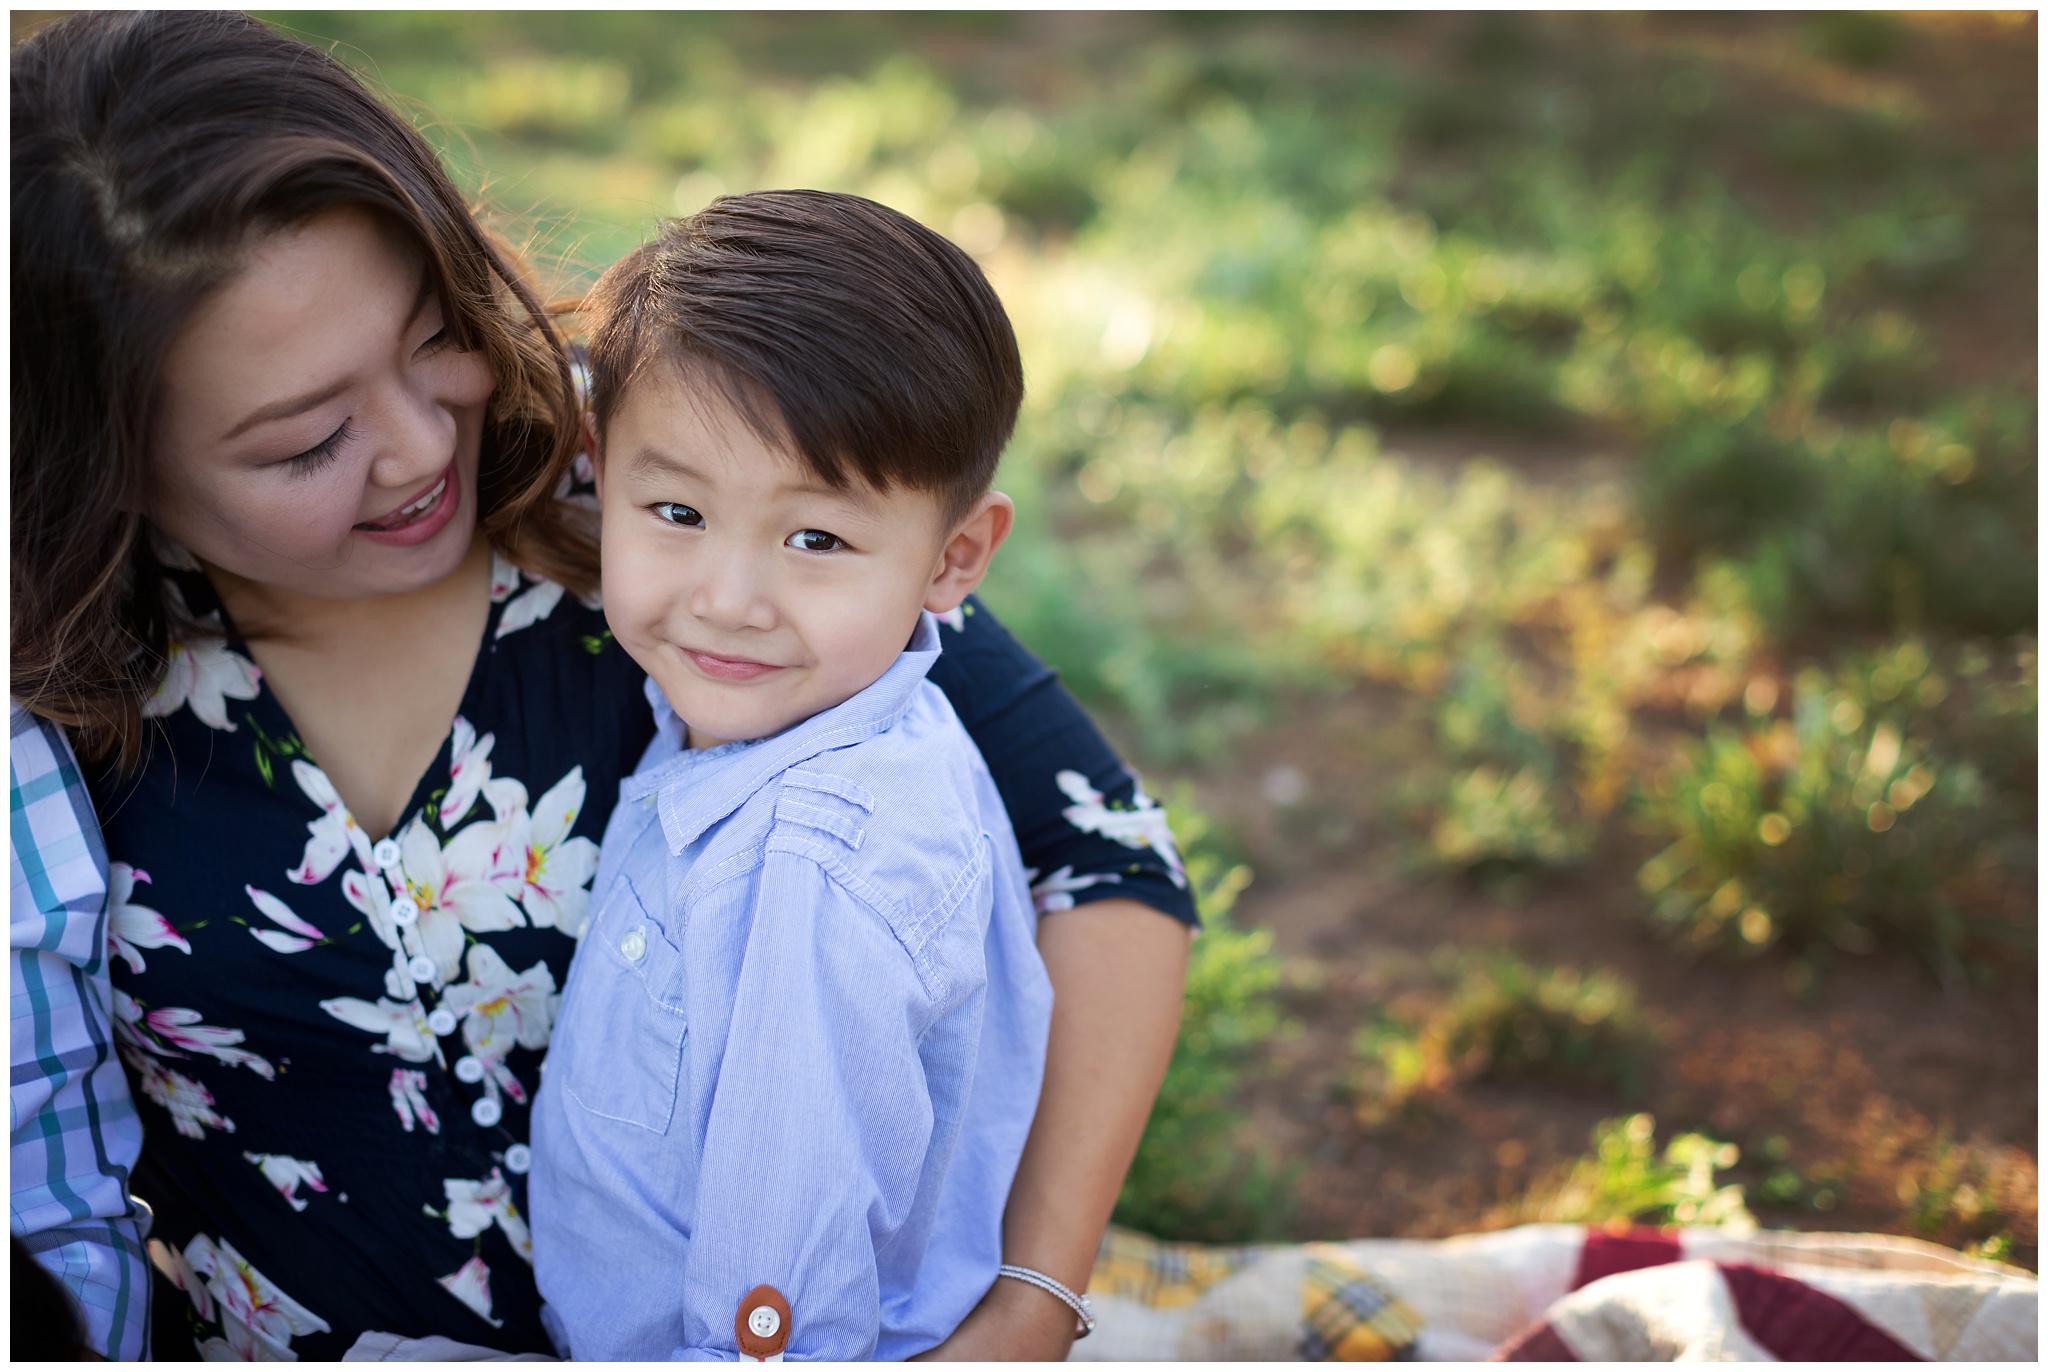 Moms and boys are so special, love the bond of mother and son captured in this photo. Photos by Stevie Cruz Photography